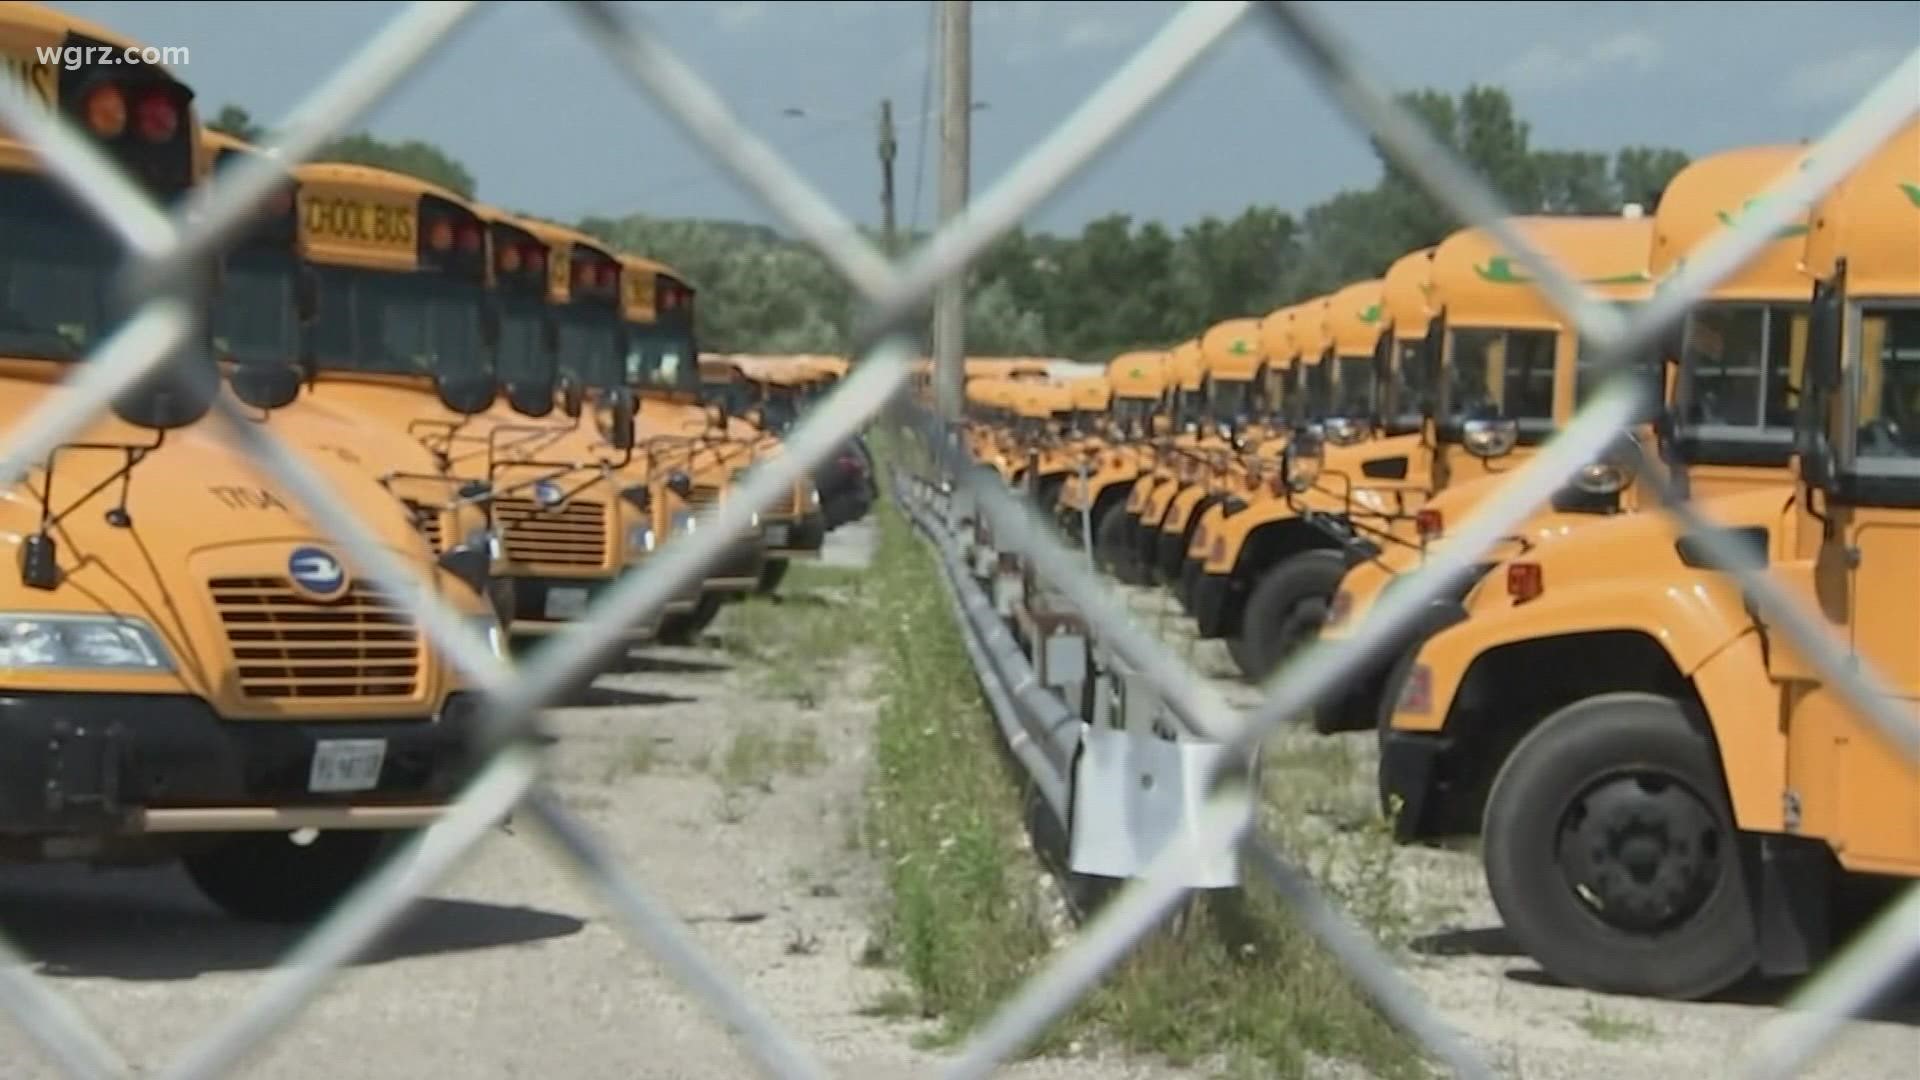 School districts in Western New York have a shortage of school bus drivers.